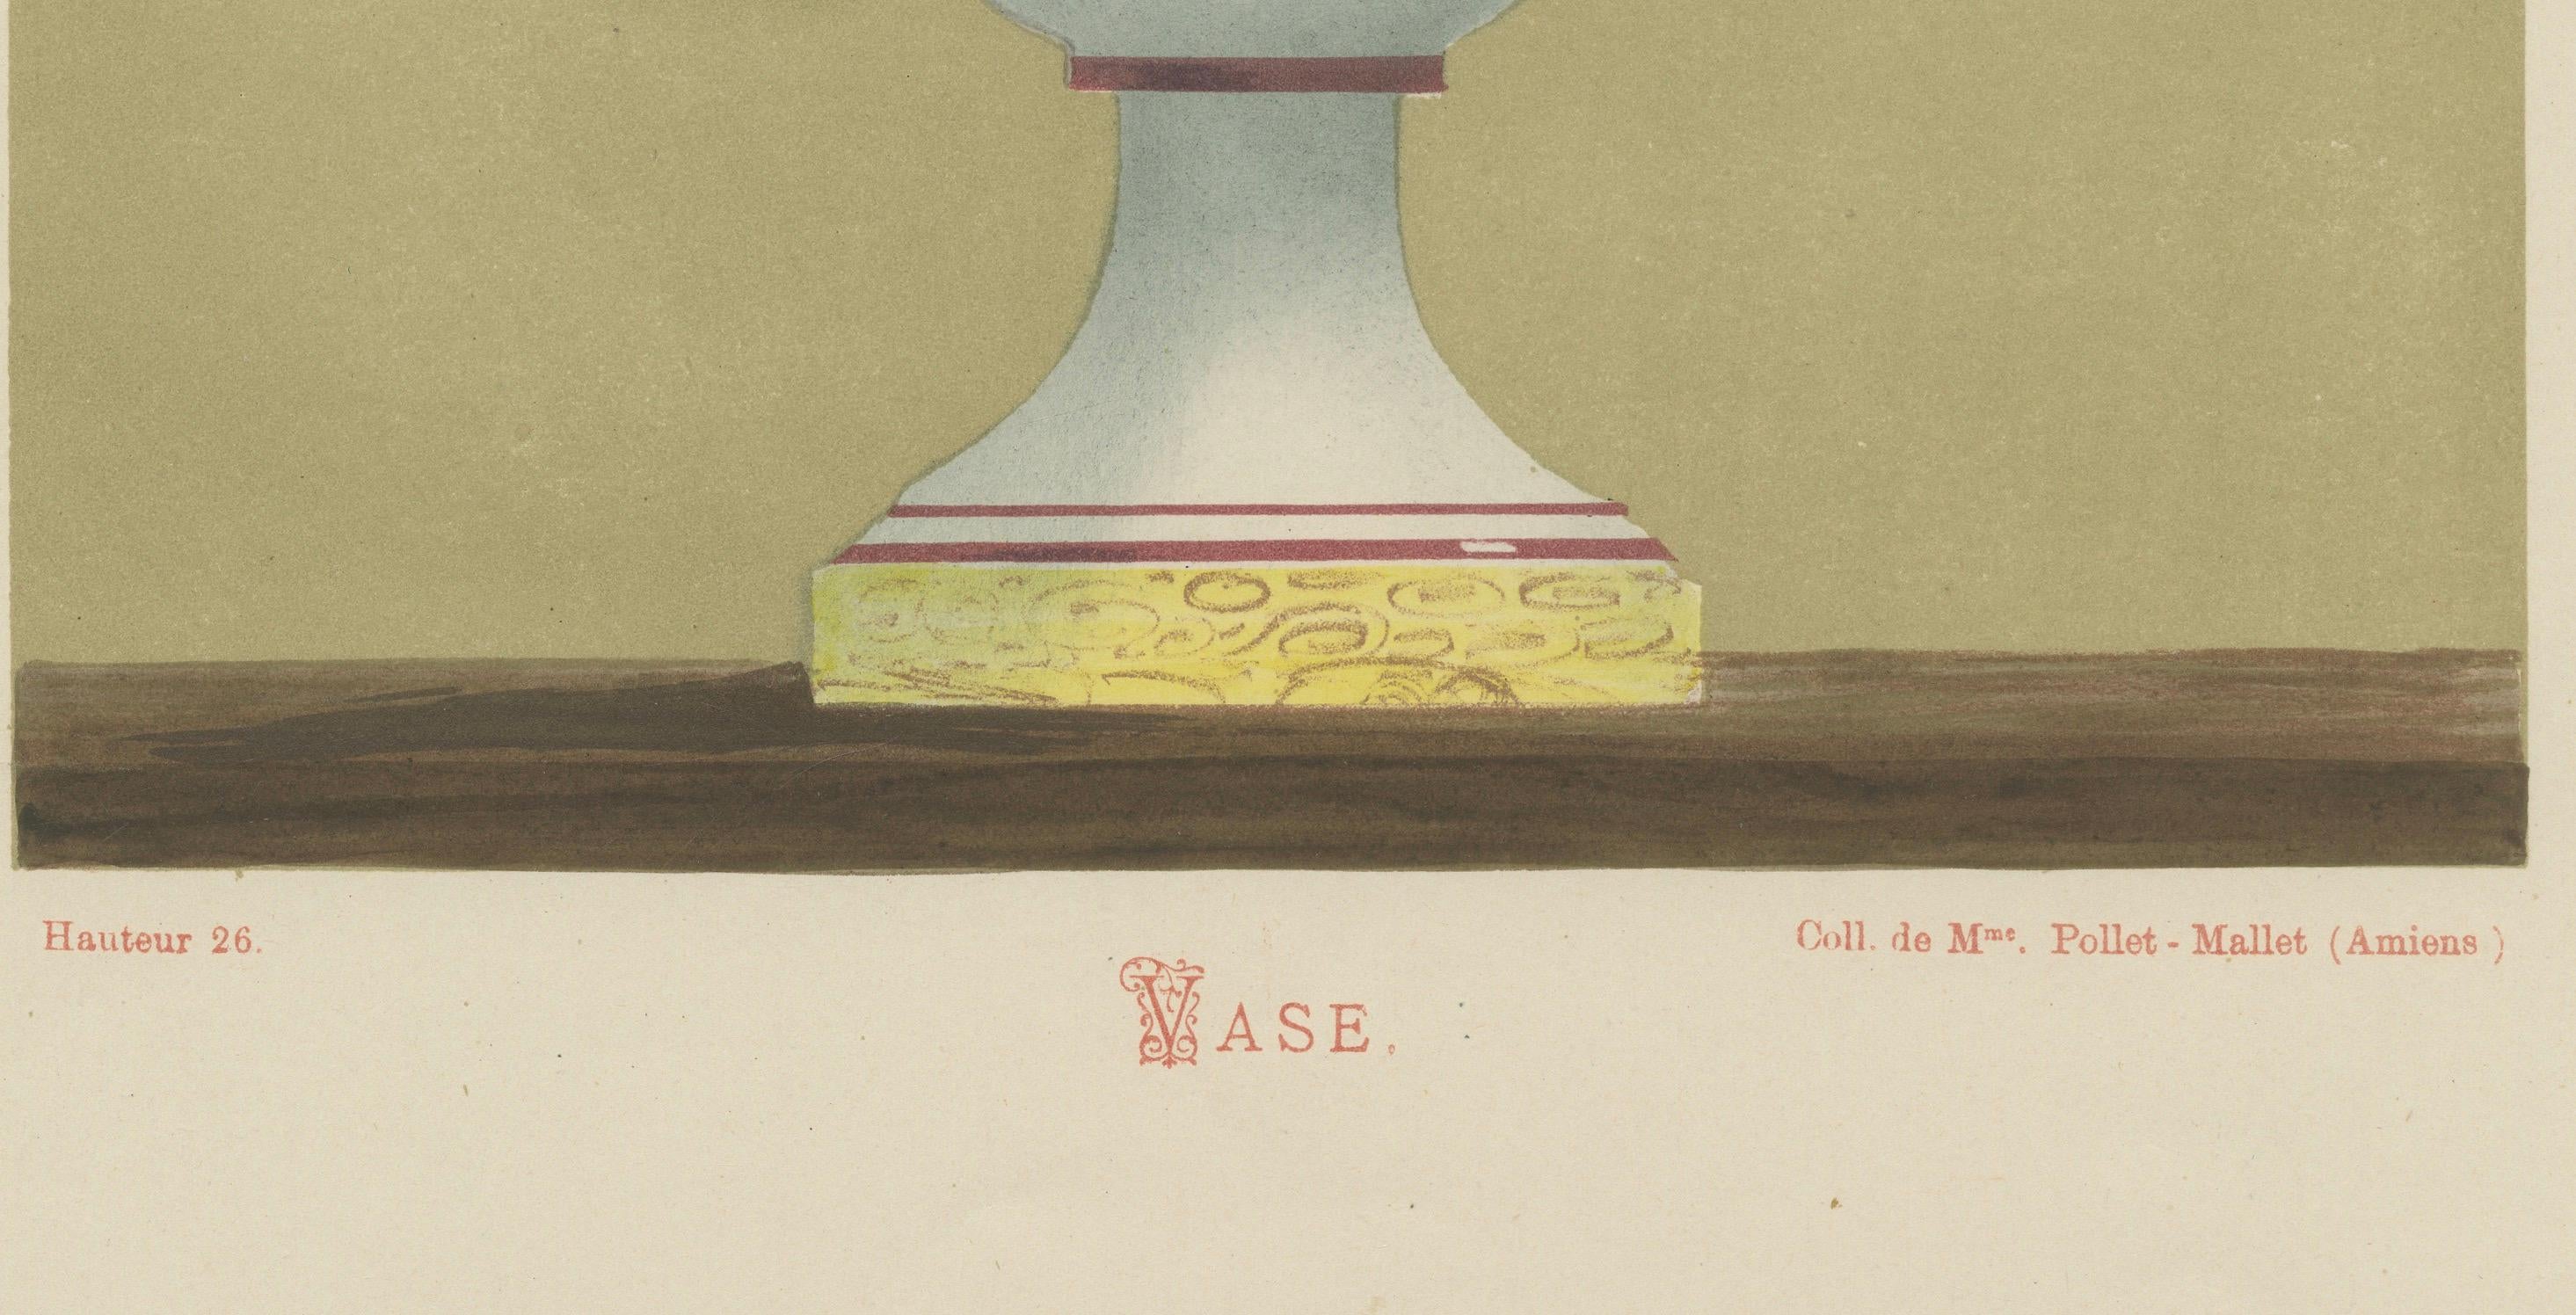 This image presents a chromolithograph of a ceramic vase from the Aprey (Haute-Marne) region, as denoted by the title. The vase, part of Plate 54, is elegantly designed with avian motifs, featuring birds perched and in flight amongst foliage,